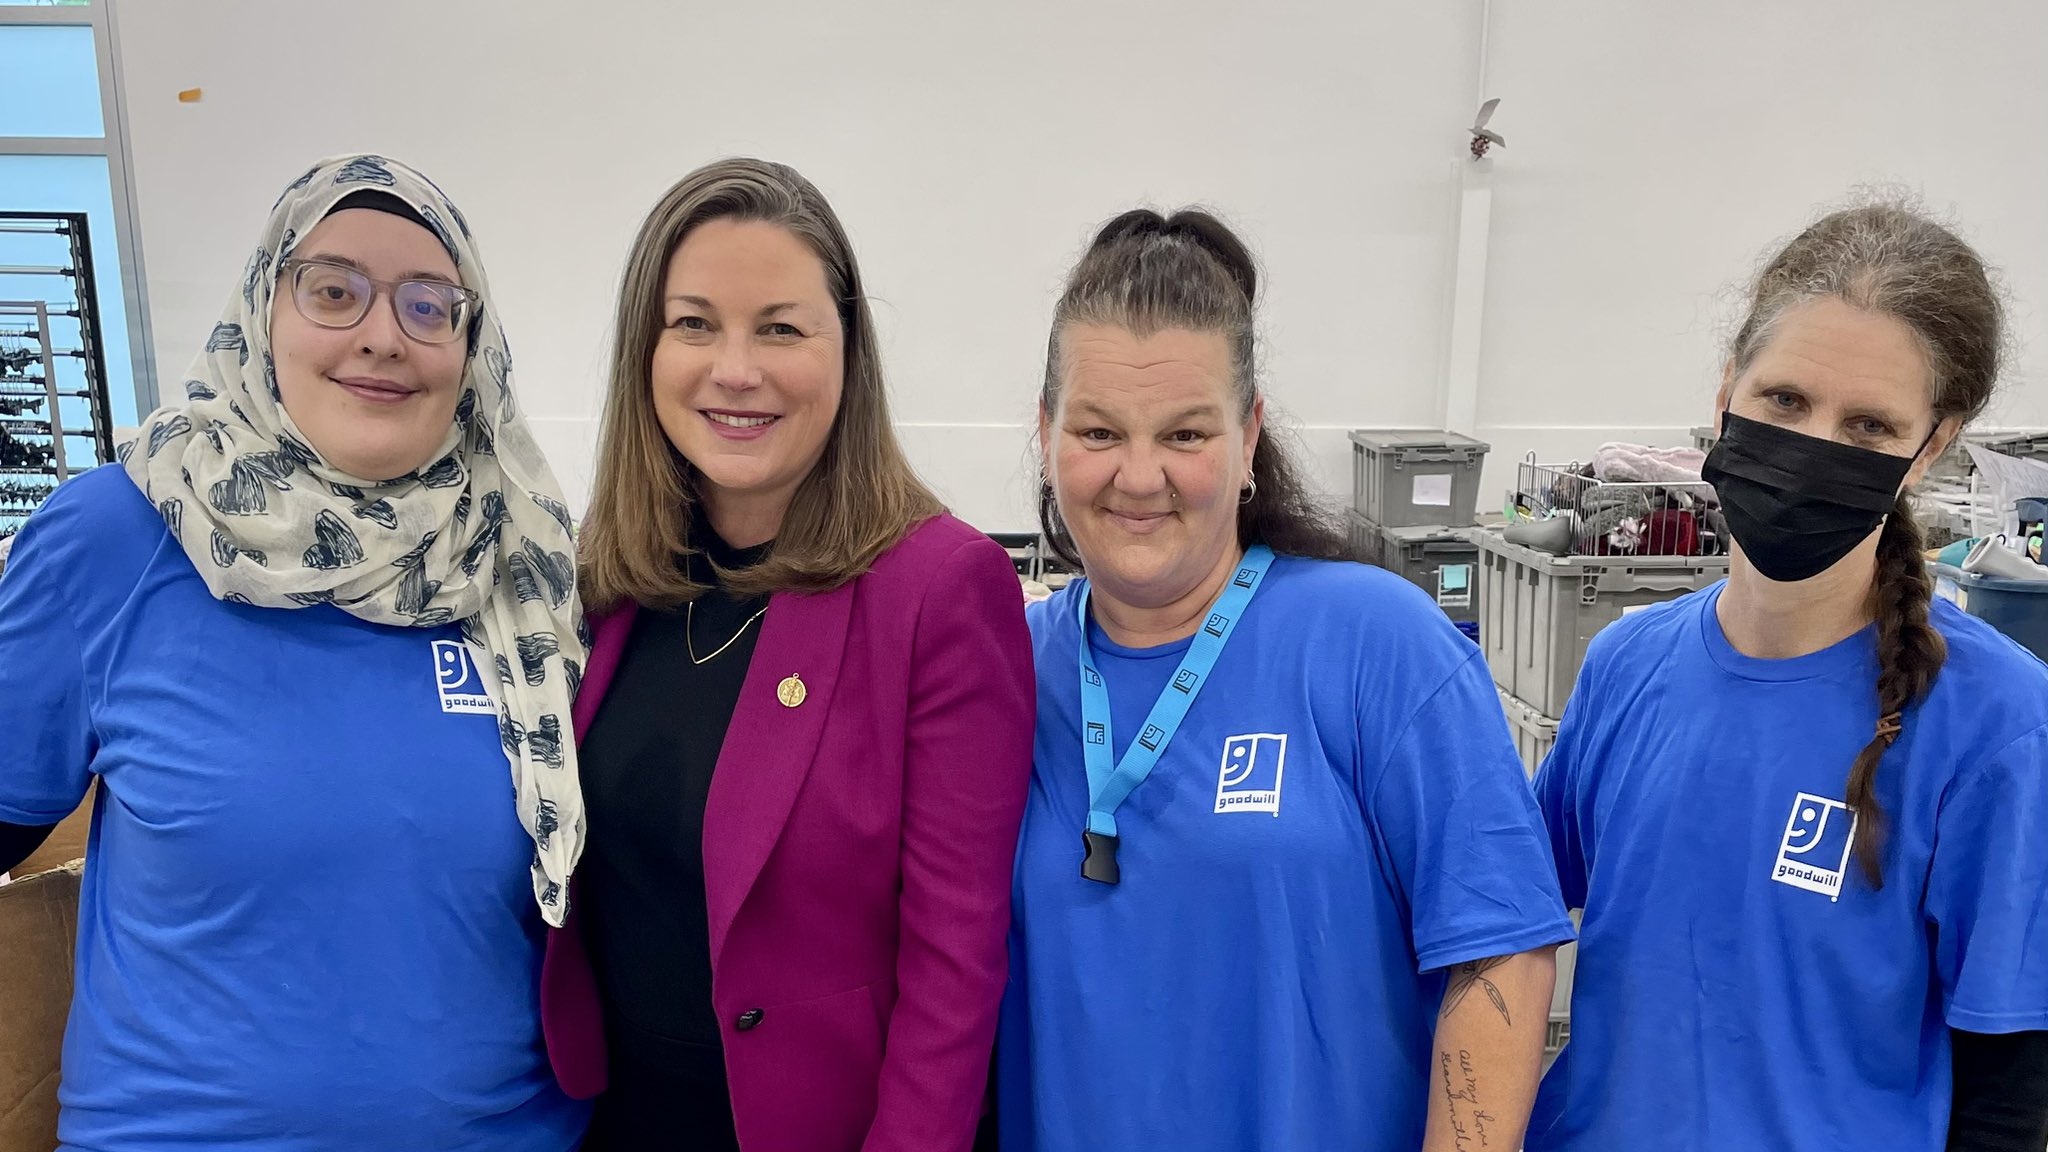 MPP Catherine Fife on X: What a crowd this morning at the Grand Opening of  the new Goodwill Community Store in Waterloo! Welcome to the community!  #kwawesome @Goodwill_OGL @gwmichelle  / X